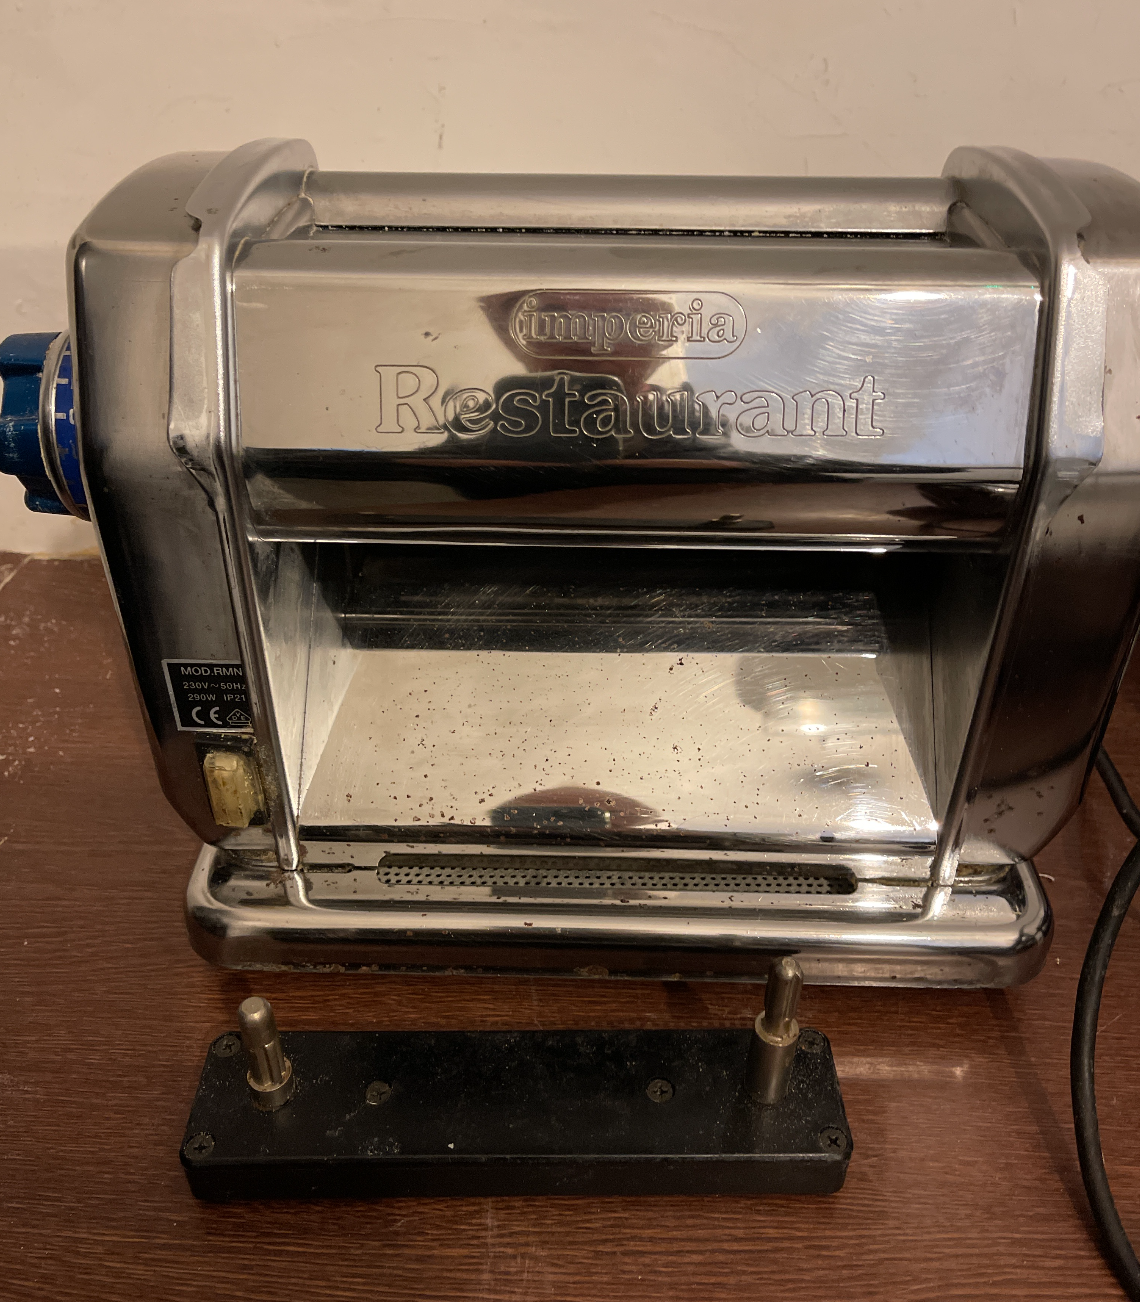 https://for-sale.used-secondhand.co.uk/media/secondhand/images/76609/imperia-restaurant-electric-machine/pasta-maker-for-sale-665.png